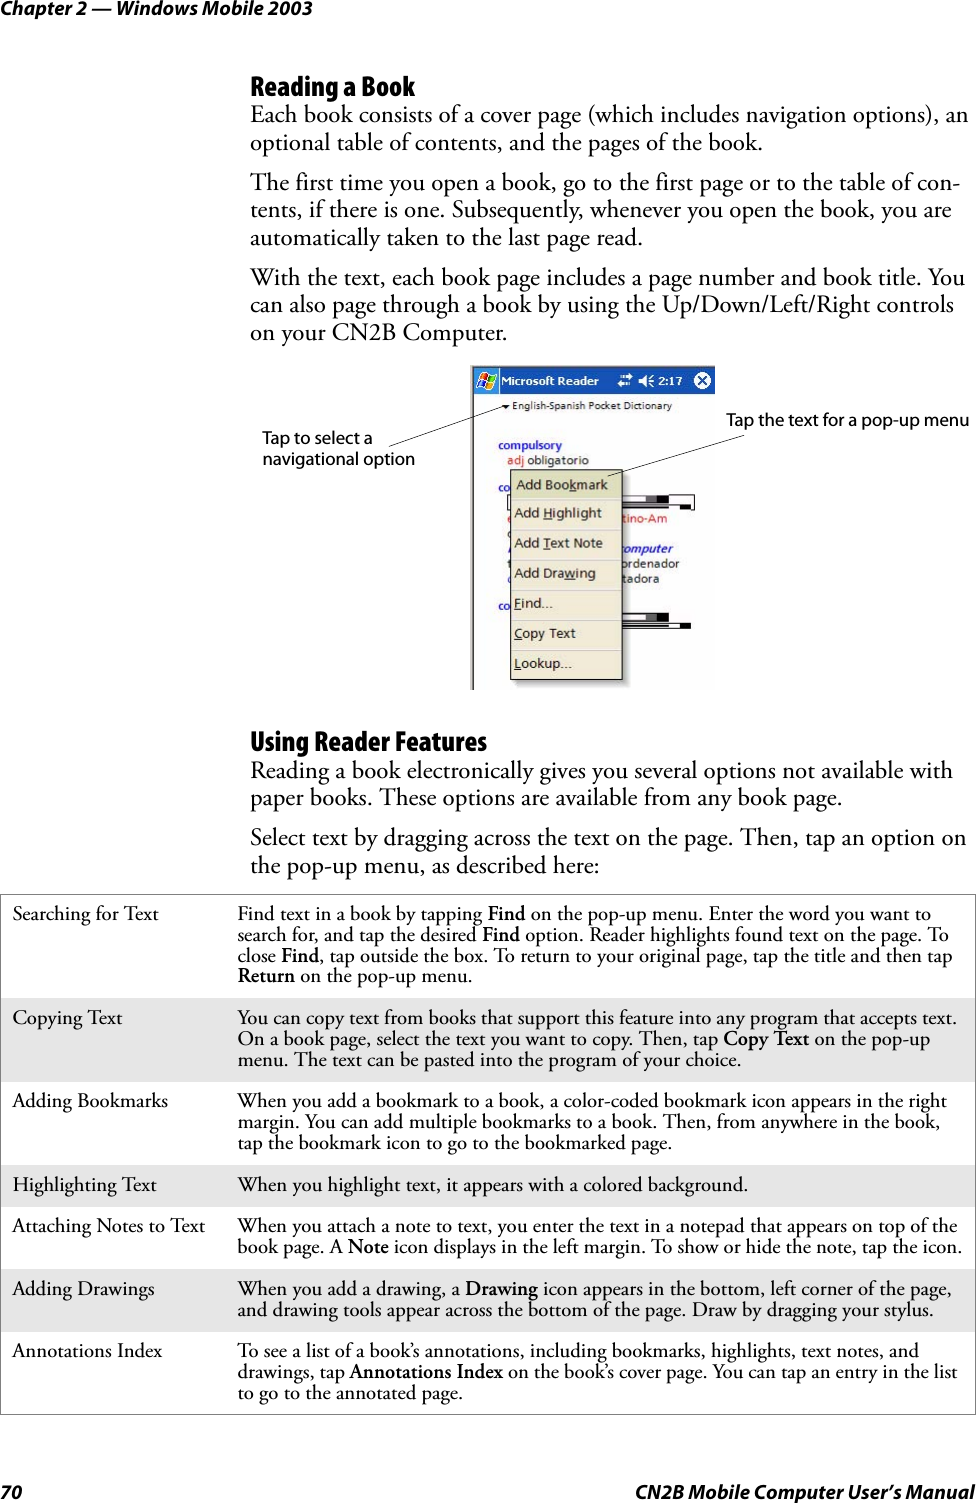 Chapter 2 — Windows Mobile 200370 CN2B Mobile Computer User’s ManualReading a BookEach book consists of a cover page (which includes navigation options), an optional table of contents, and the pages of the book.The first time you open a book, go to the first page or to the table of con-tents, if there is one. Subsequently, whenever you open the book, you are automatically taken to the last page read.With the text, each book page includes a page number and book title. You can also page through a book by using the Up/Down/Left/Right controls on your CN2B Computer.Using Reader FeaturesReading a book electronically gives you several options not available with paper books. These options are available from any book page.Select text by dragging across the text on the page. Then, tap an option on the pop-up menu, as described here:Searching for Text Find text in a book by tapping Find on the pop-up menu. Enter the word you want to search for, and tap the desired Find option. Reader highlights found text on the page. To close Find, tap outside the box. To return to your original page, tap the title and then tap Return on the pop-up menu.Copying Text You can copy text from books that support this feature into any program that accepts text. On a book page, select the text you want to copy. Then, tap Copy Text on the pop-up menu. The text can be pasted into the program of your choice.Adding Bookmarks When you add a bookmark to a book, a color-coded bookmark icon appears in the right margin. You can add multiple bookmarks to a book. Then, from anywhere in the book, tap the bookmark icon to go to the bookmarked page.Highlighting Text When you highlight text, it appears with a colored background.Attaching Notes to Text When you attach a note to text, you enter the text in a notepad that appears on top of the book page. A Note icon displays in the left margin. To show or hide the note, tap the icon.Adding Drawings When you add a drawing, a Drawing icon appears in the bottom, left corner of the page, and drawing tools appear across the bottom of the page. Draw by dragging your stylus.Annotations Index To see a list of a book’s annotations, including bookmarks, highlights, text notes, and drawings, tap Annotations Index on the book’s cover page. You can tap an entry in the list to go to the annotated page.Tap to select a navigational optionTap the text for a pop-up menu